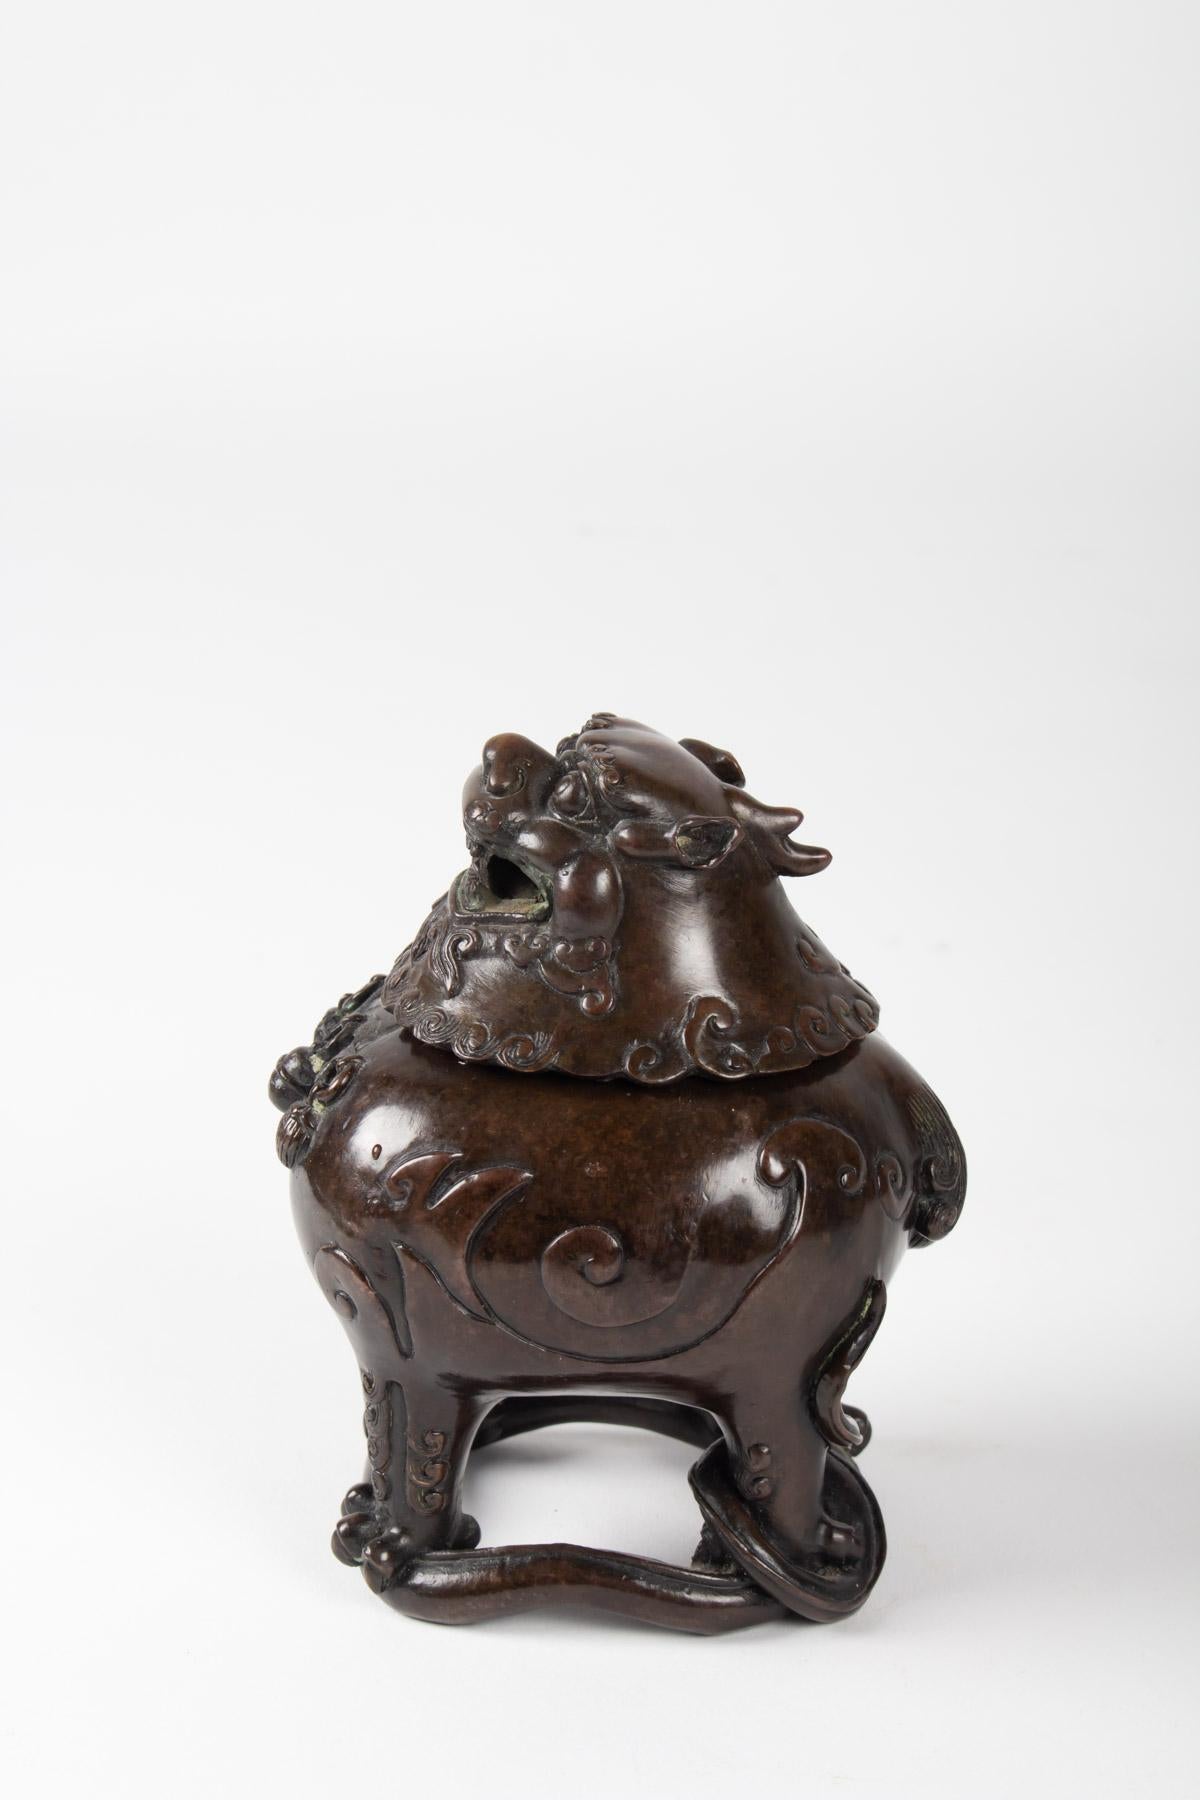 The mythical beast with separately cast head with open mouth, bearing an apocryphal Ming mark to the underside, Qing dynasty, early 19th century
Measures: H 13cm, W 9cm.